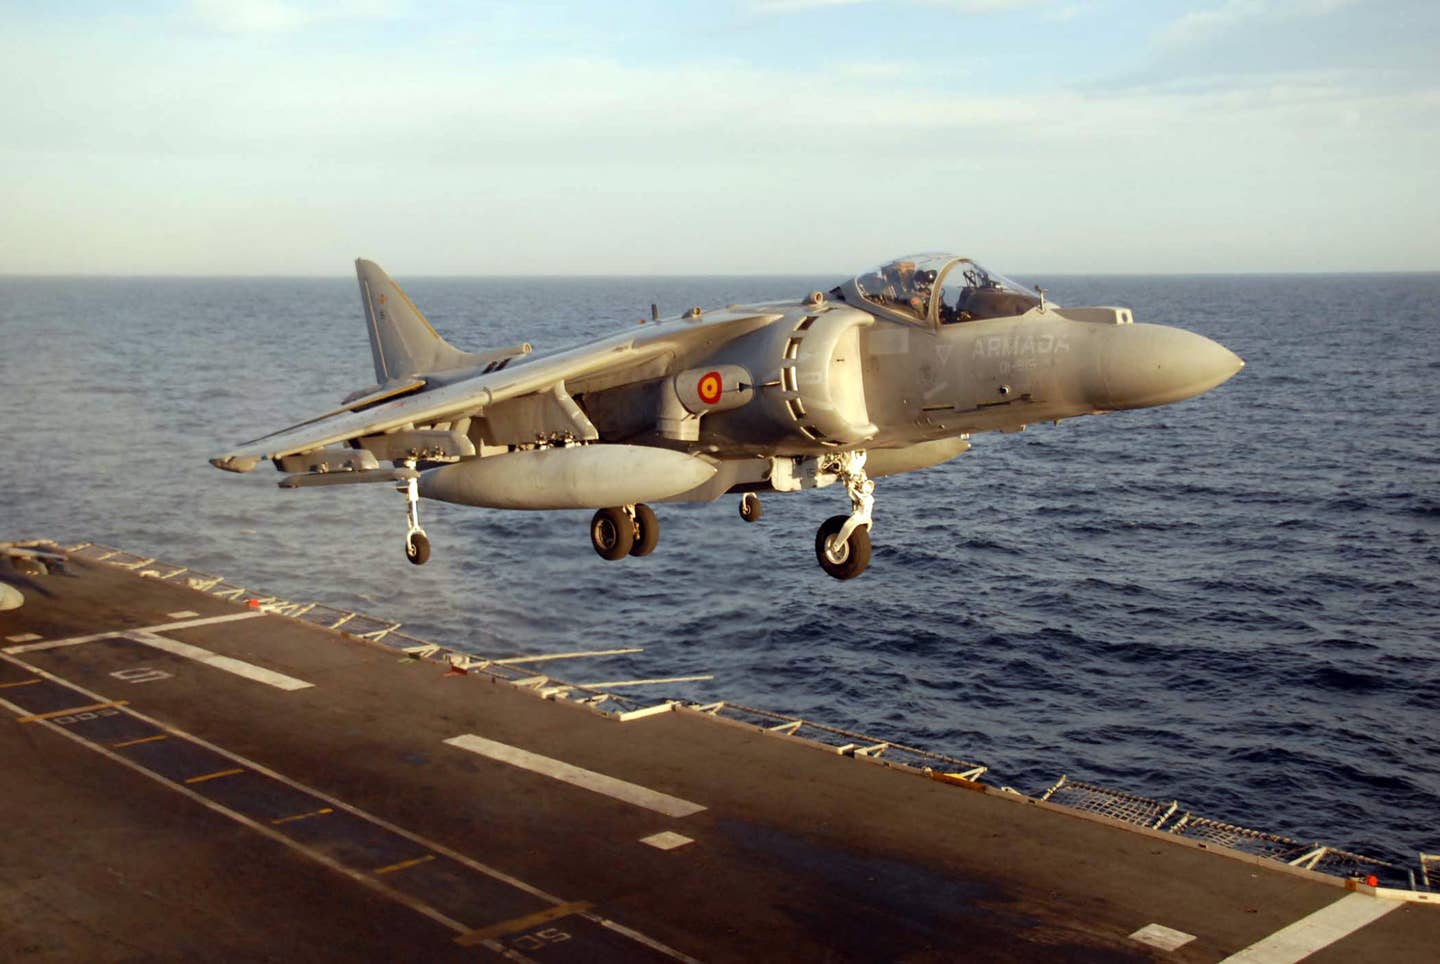 An EAV-8B Harrier II from the Spanish aircraft carrier Principe de Asturias (R 11) prepares to land after a live-fire exercise as part of a passing exercise with ships assigned to Standing NATO Maritime Group Two (SNMG-2). (U.S. Navy photo by Mass Communication Specialist Leonardo Carrillo)